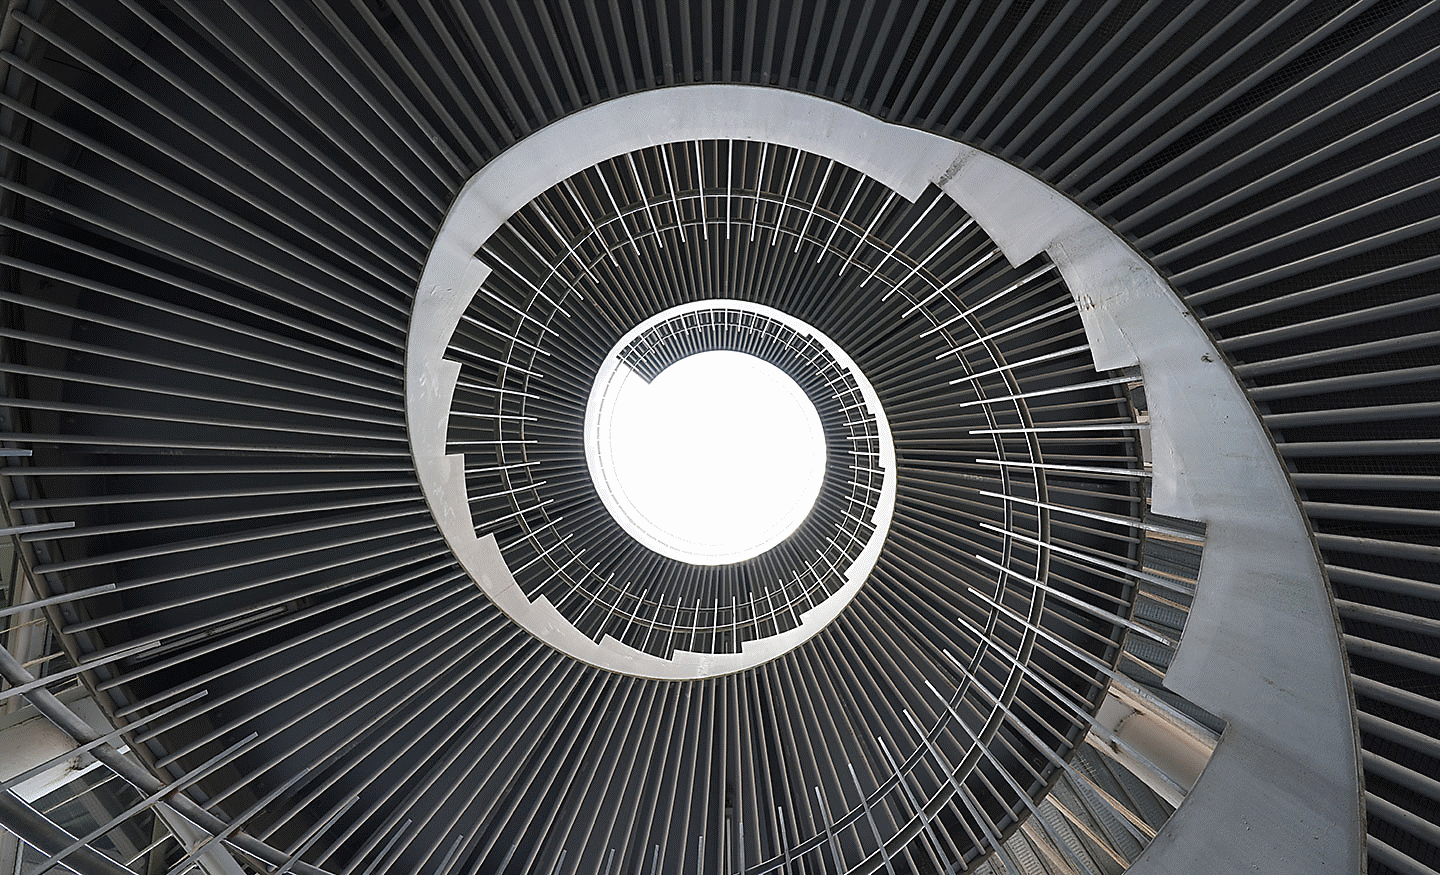 Image of spiral staircase